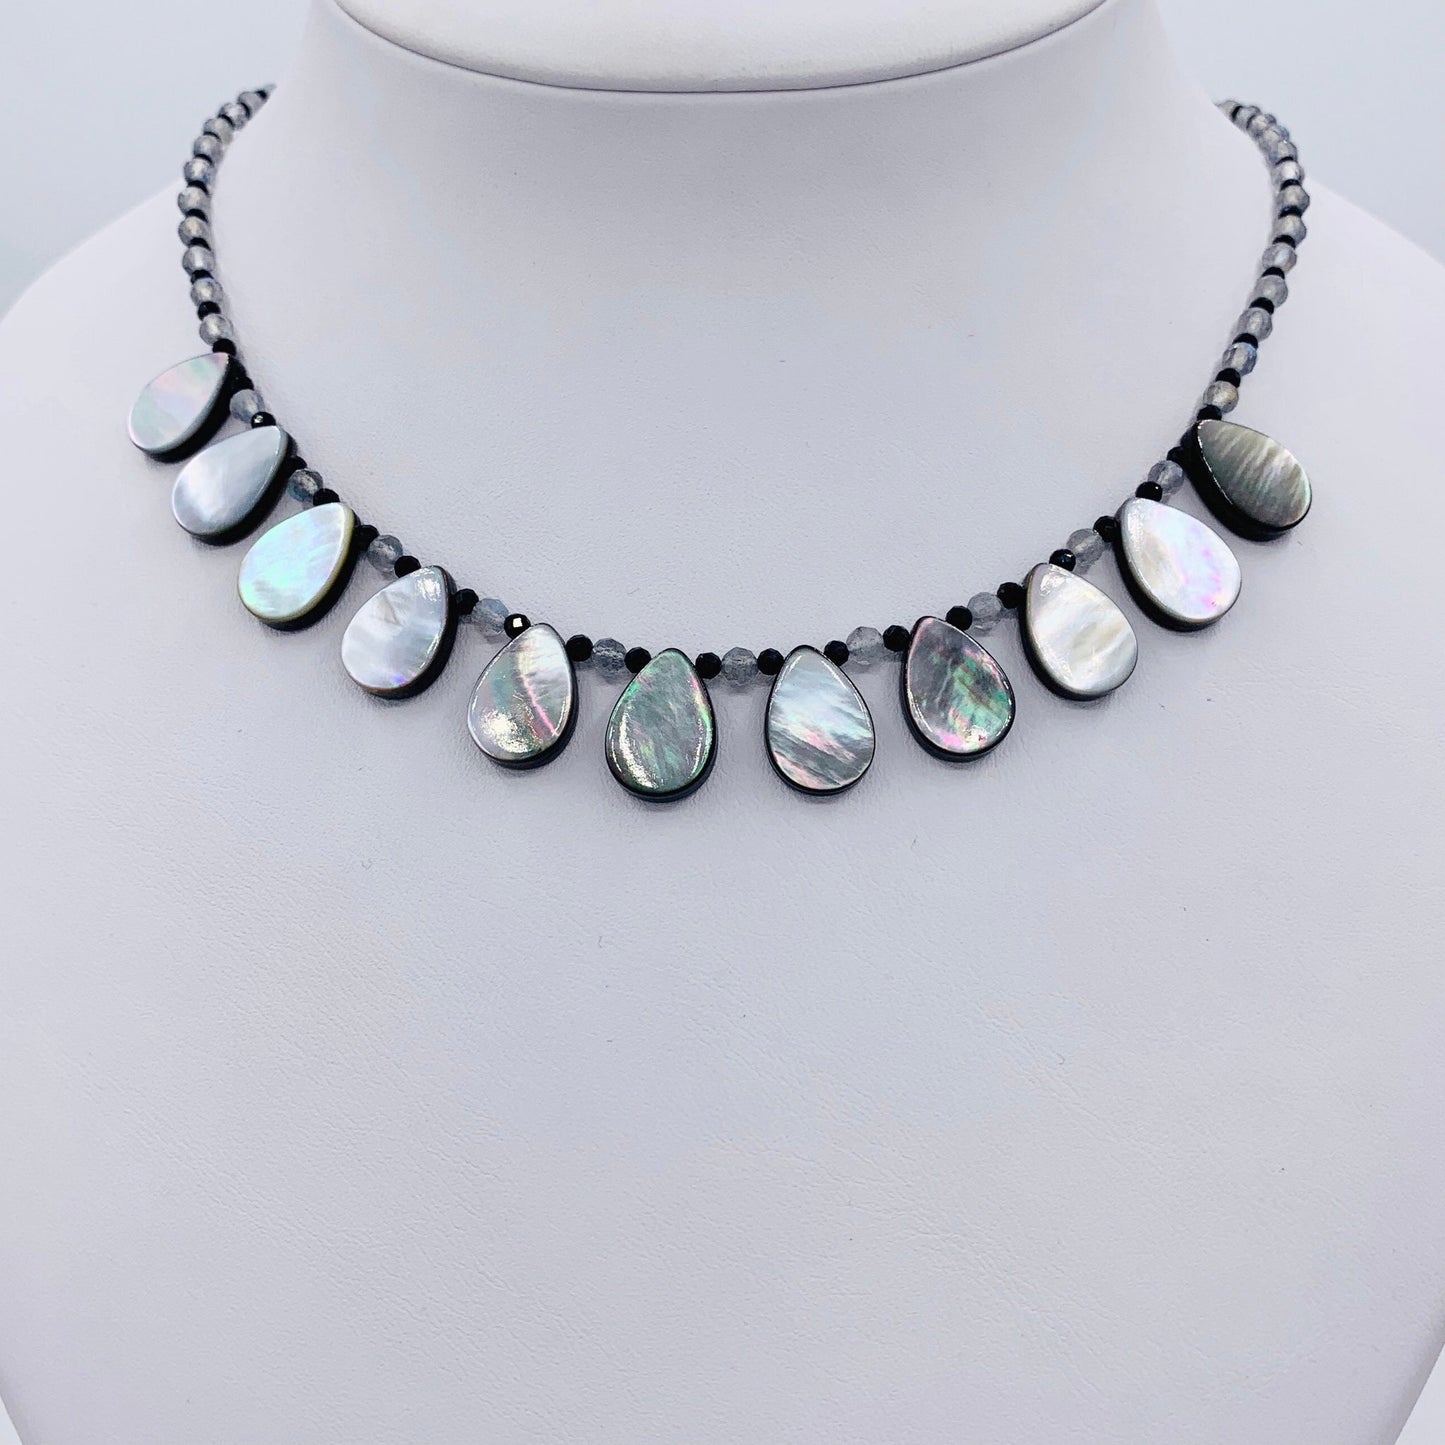 Labradorite with Black Mother of Pearl and Black Spinel Necklace 14K GF Gold